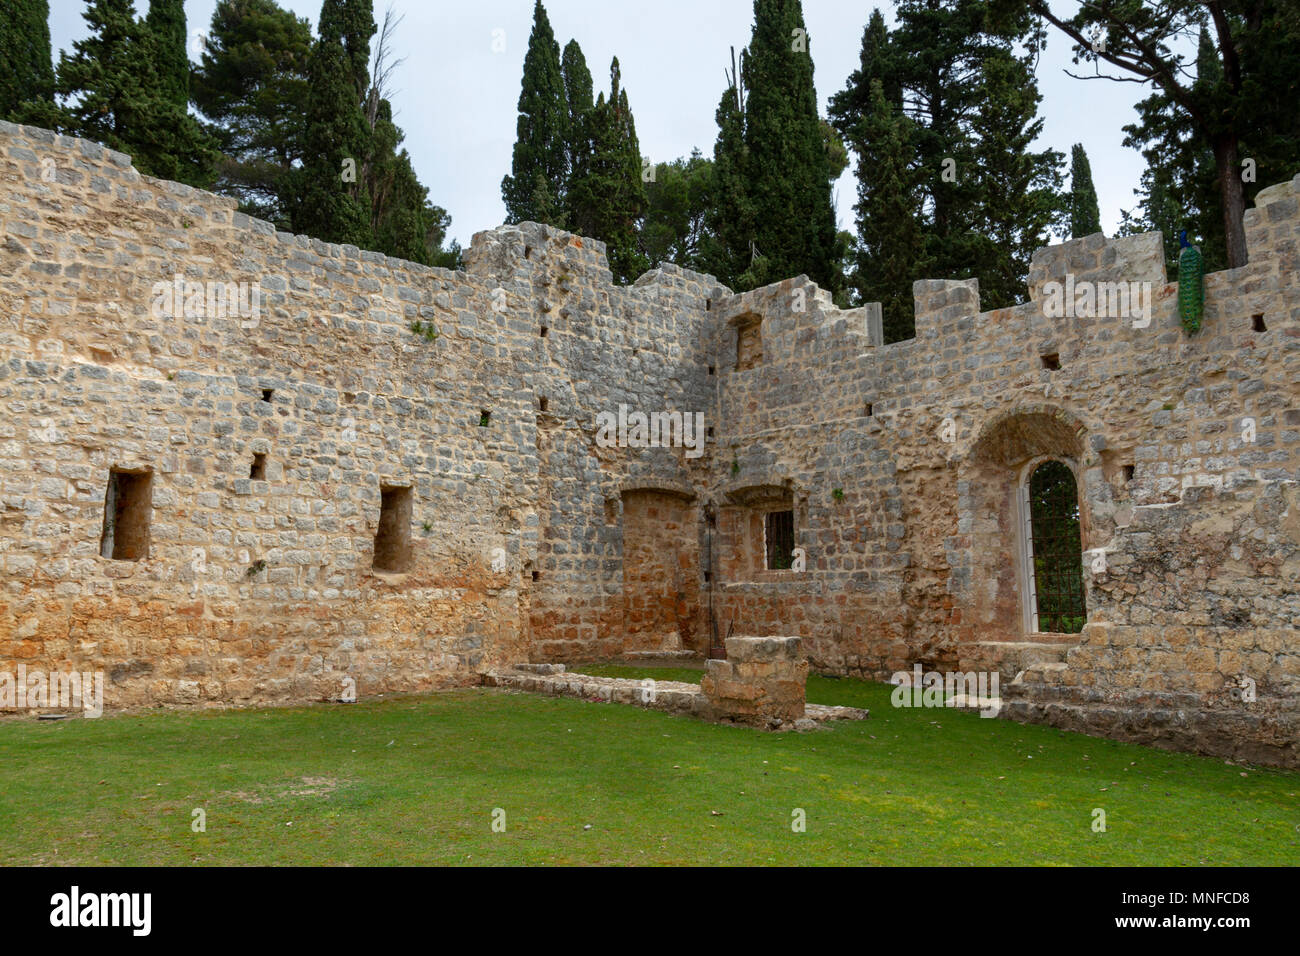 The tower, part of the destroyed cloisters inside the the former Benedictine monastery on Lokrum Island, in the Adriatic Sea off Dubrovnik, Croatia. Stock Photo